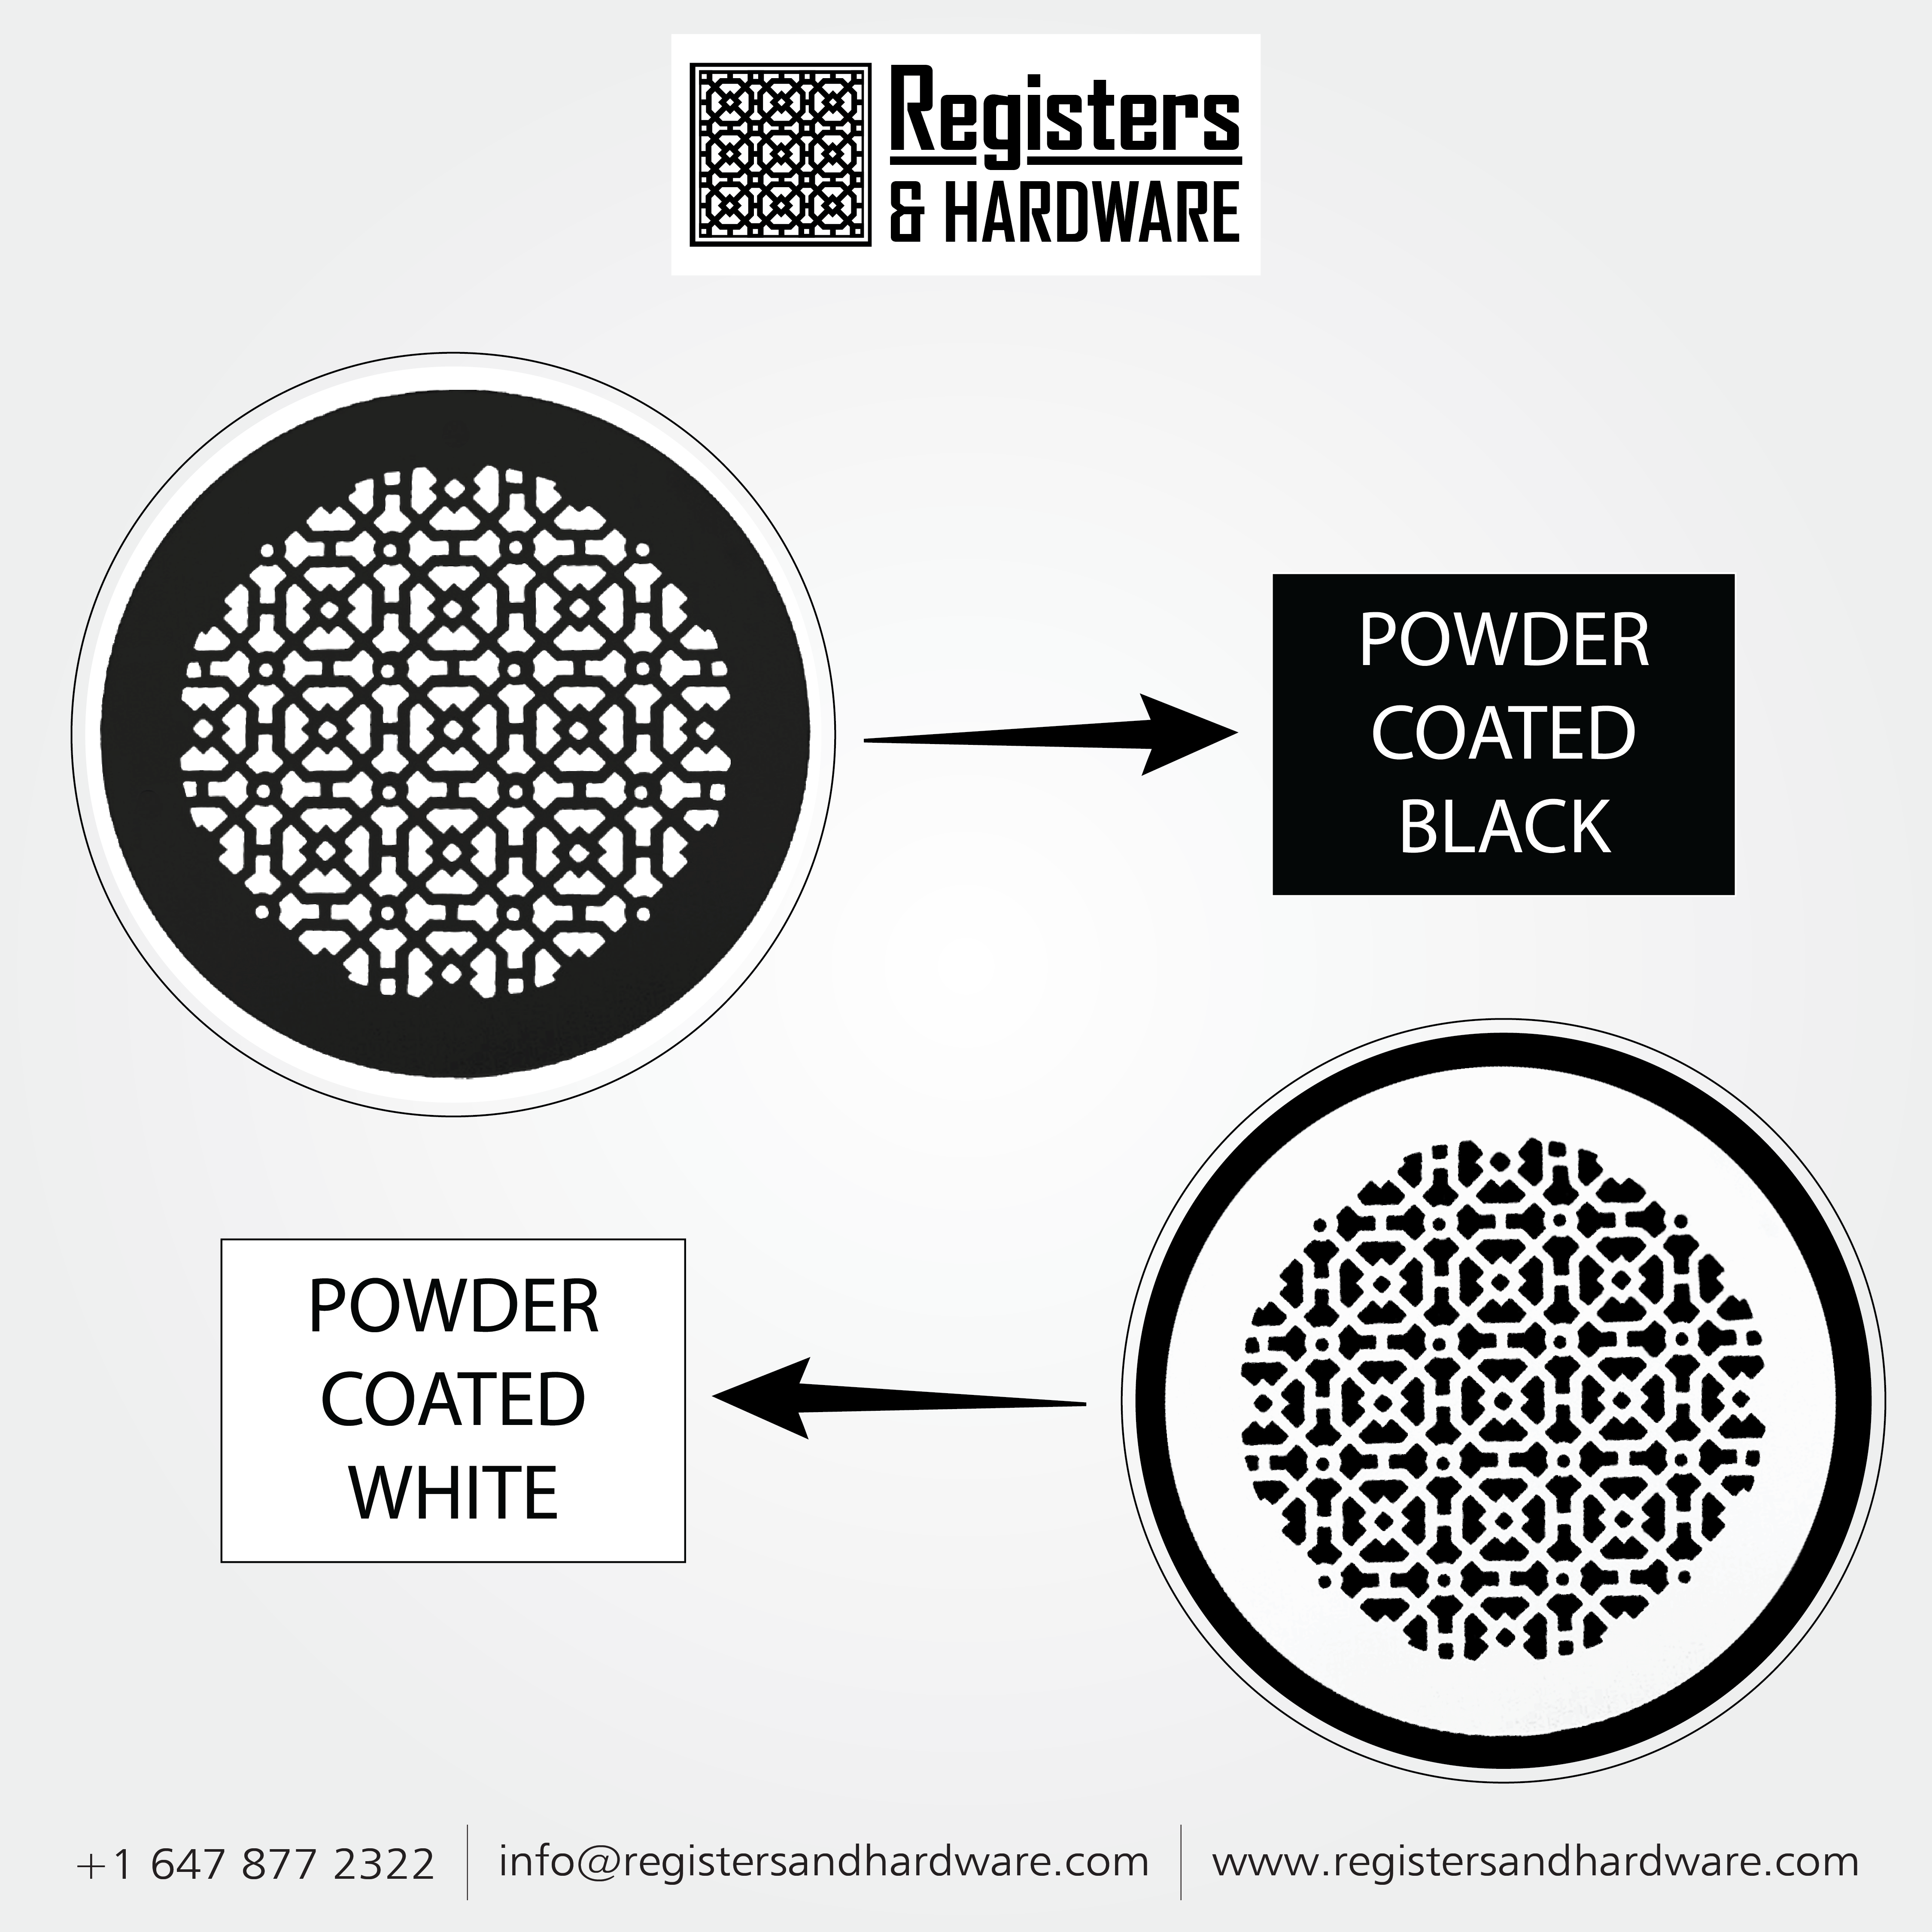 Achtek 5" Duct opening Solid Cast Aluminum Round Grille ( 6-1/2" Round Overall) | Powder Coated